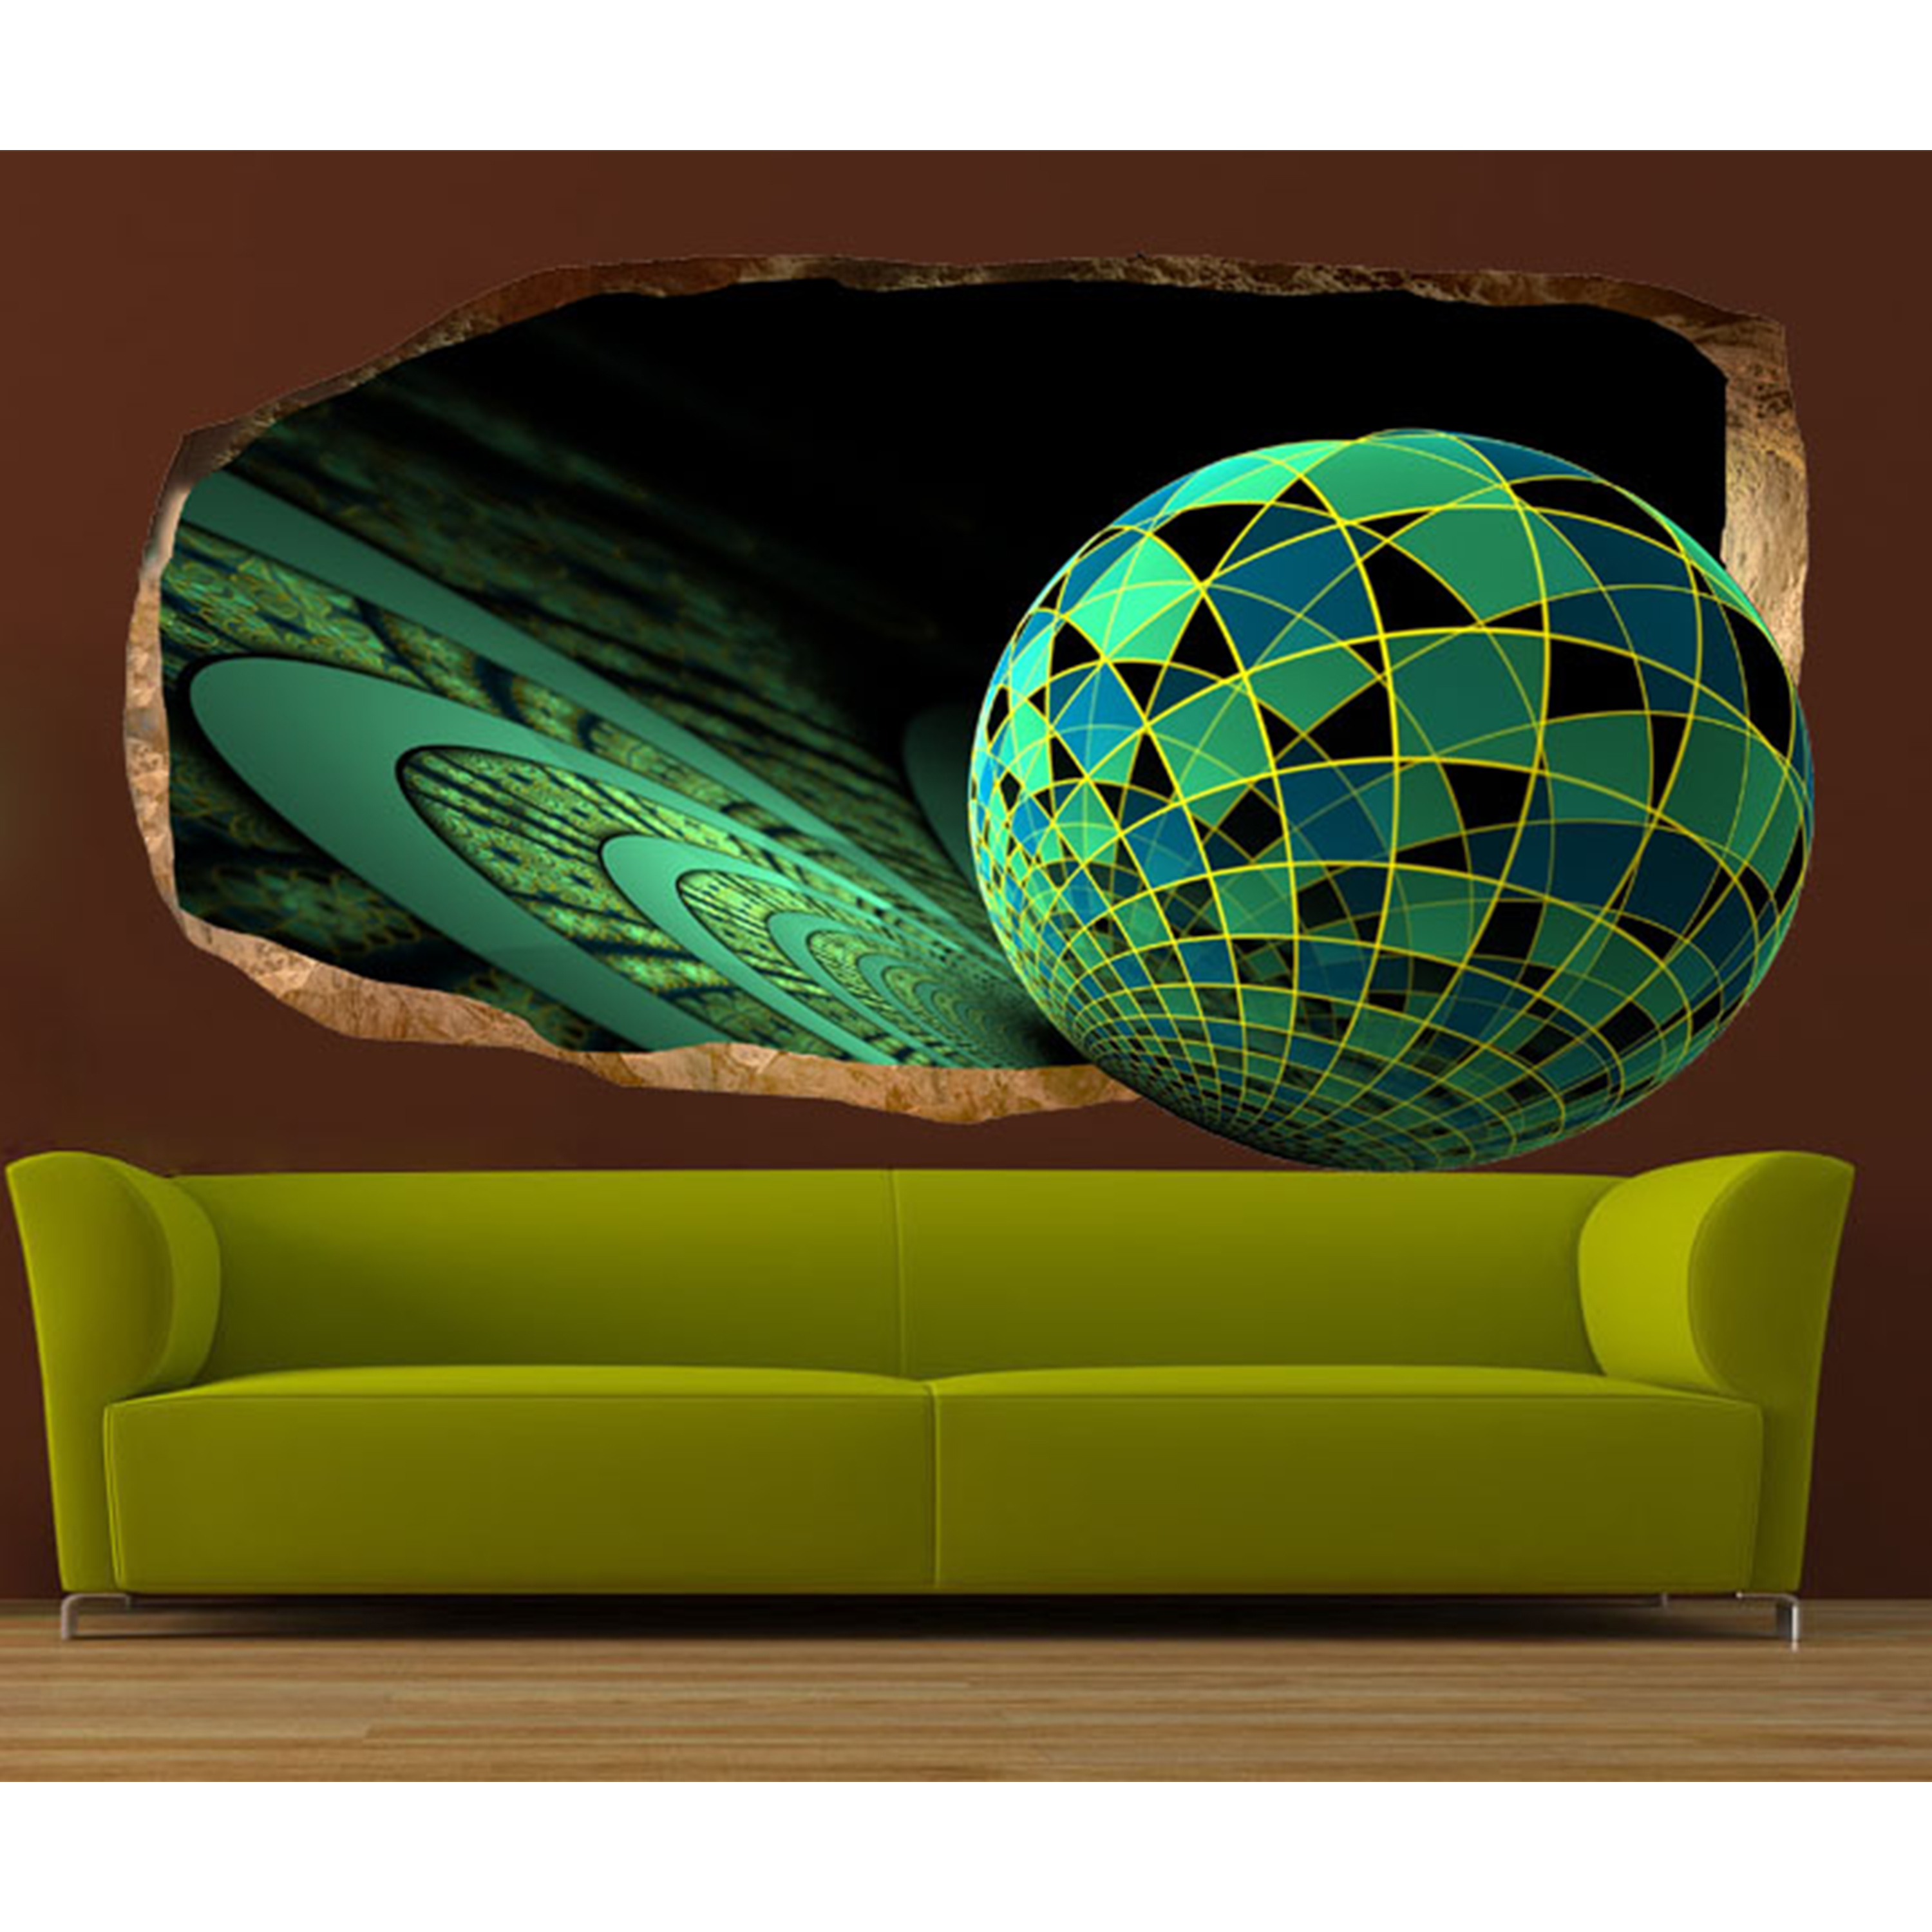 Startonight 3D Mural Wall Art Photo Decor Green Mosaic Amazing Dual View Surprise Wall Mural Wallpaper for Bedroom Abstract Wall Art Gift Large 47.24 ?? By 86.61 ?? - image 1 of 4